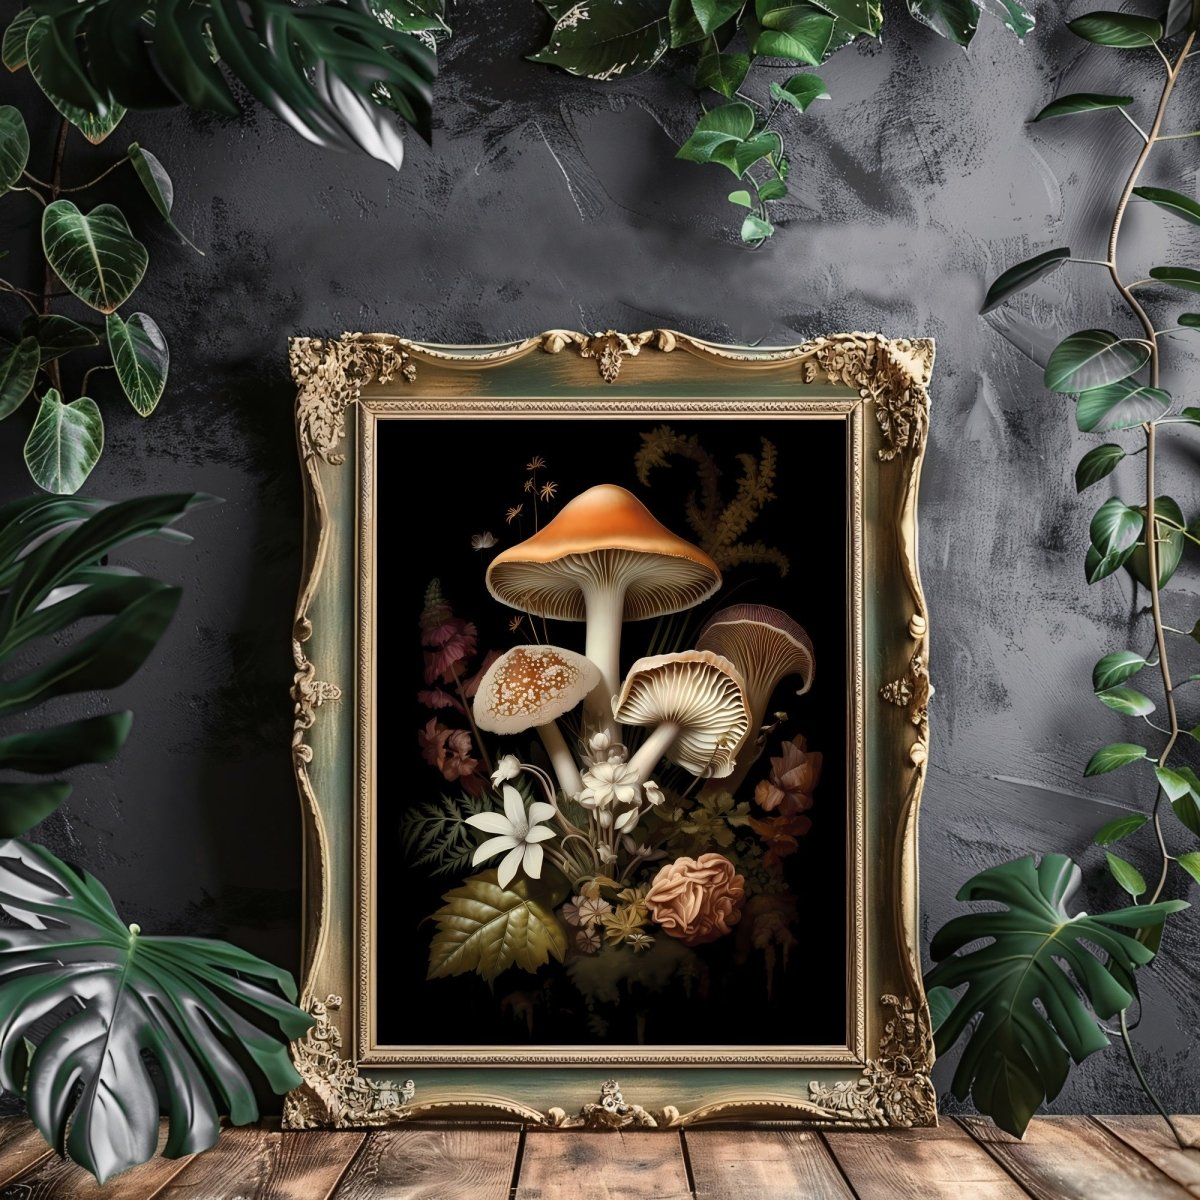 Dark Floral Mushrooms Gothic Wall Art Dark Cottagecore Floral Print Nature Goblincore Vintage Aesthetic Digital Print Moody Botanical Paper Poster Print - Everything Pixel